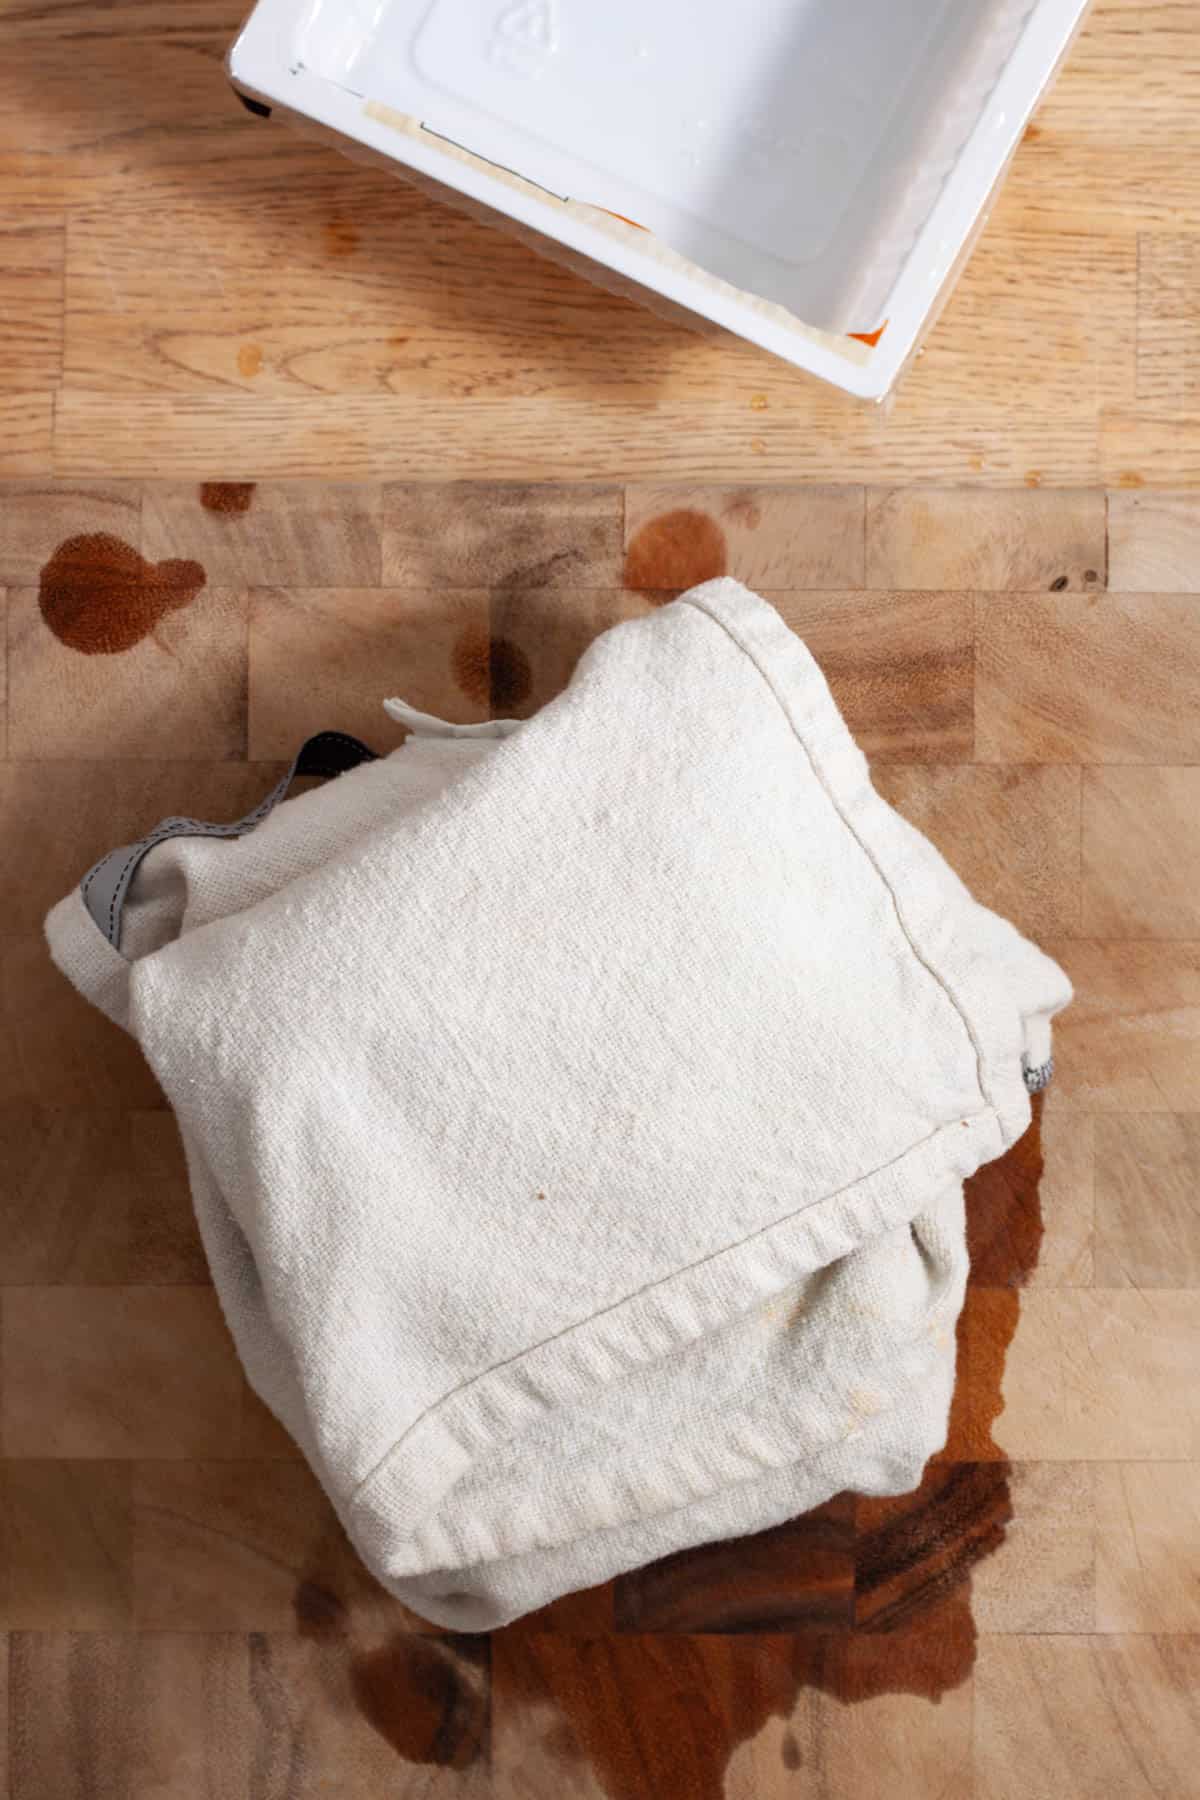 A towel wrapped around a block of extra firm tofu.